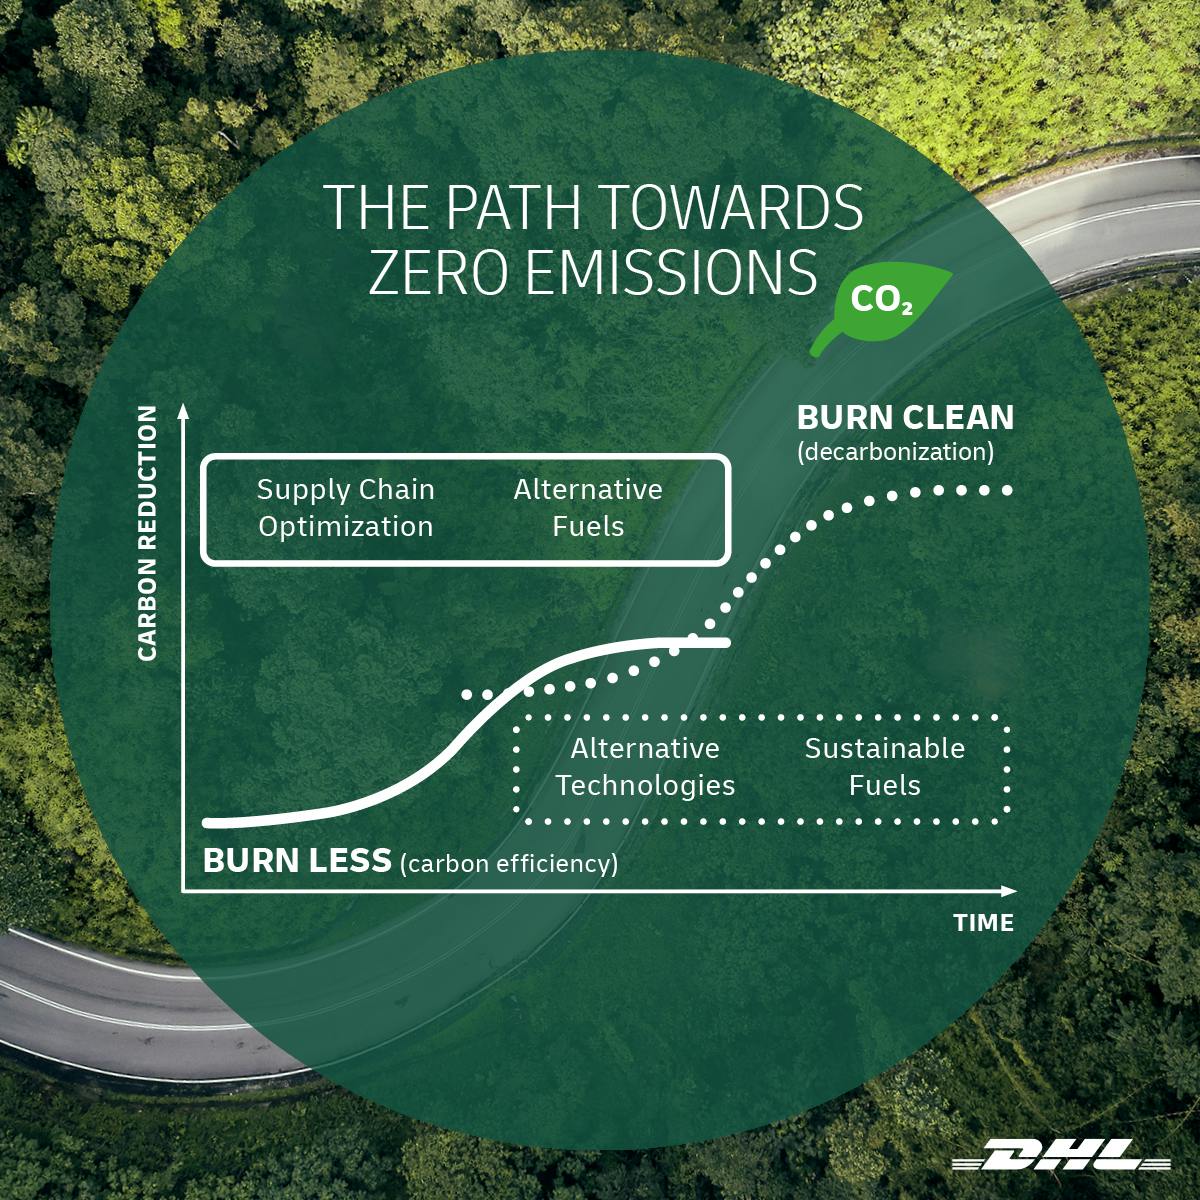 DHL uses the S-curve framework to measure carbon reduction